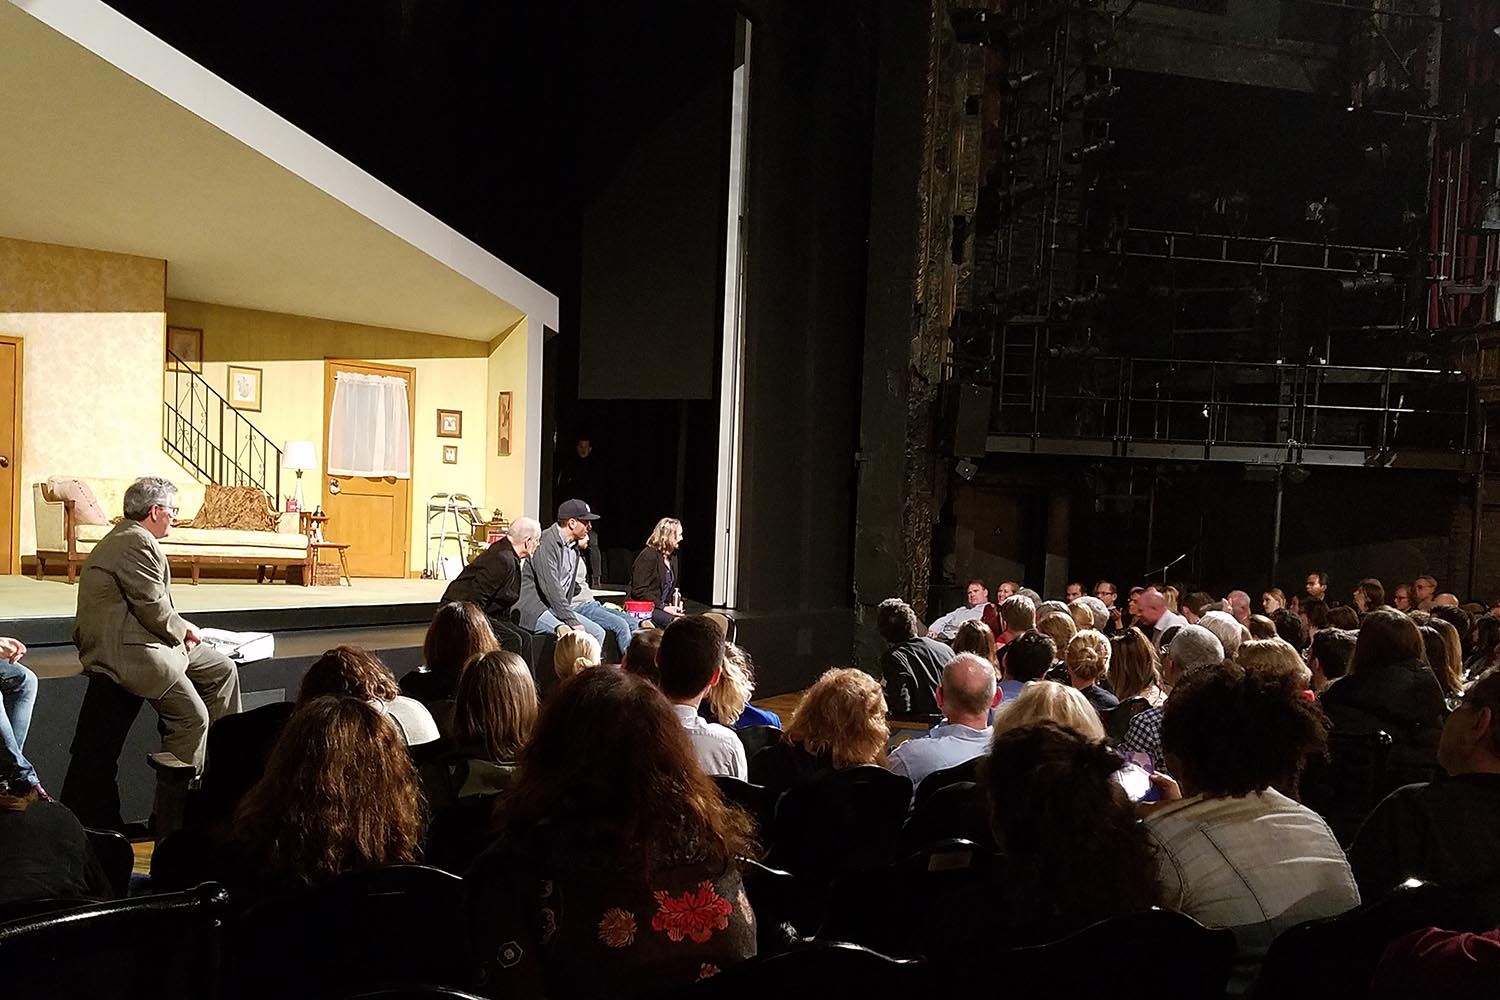 On Nov. 1, more than 200 Wesleyan alumni, parents and guests attended "Wesleyan on Broadway: The Lifespan of a Fact" at Studio 54 in New York City. The event included a performance of The Lifespan of a Fact, produced by Tony Award-winner Jeffrey Richards '69.